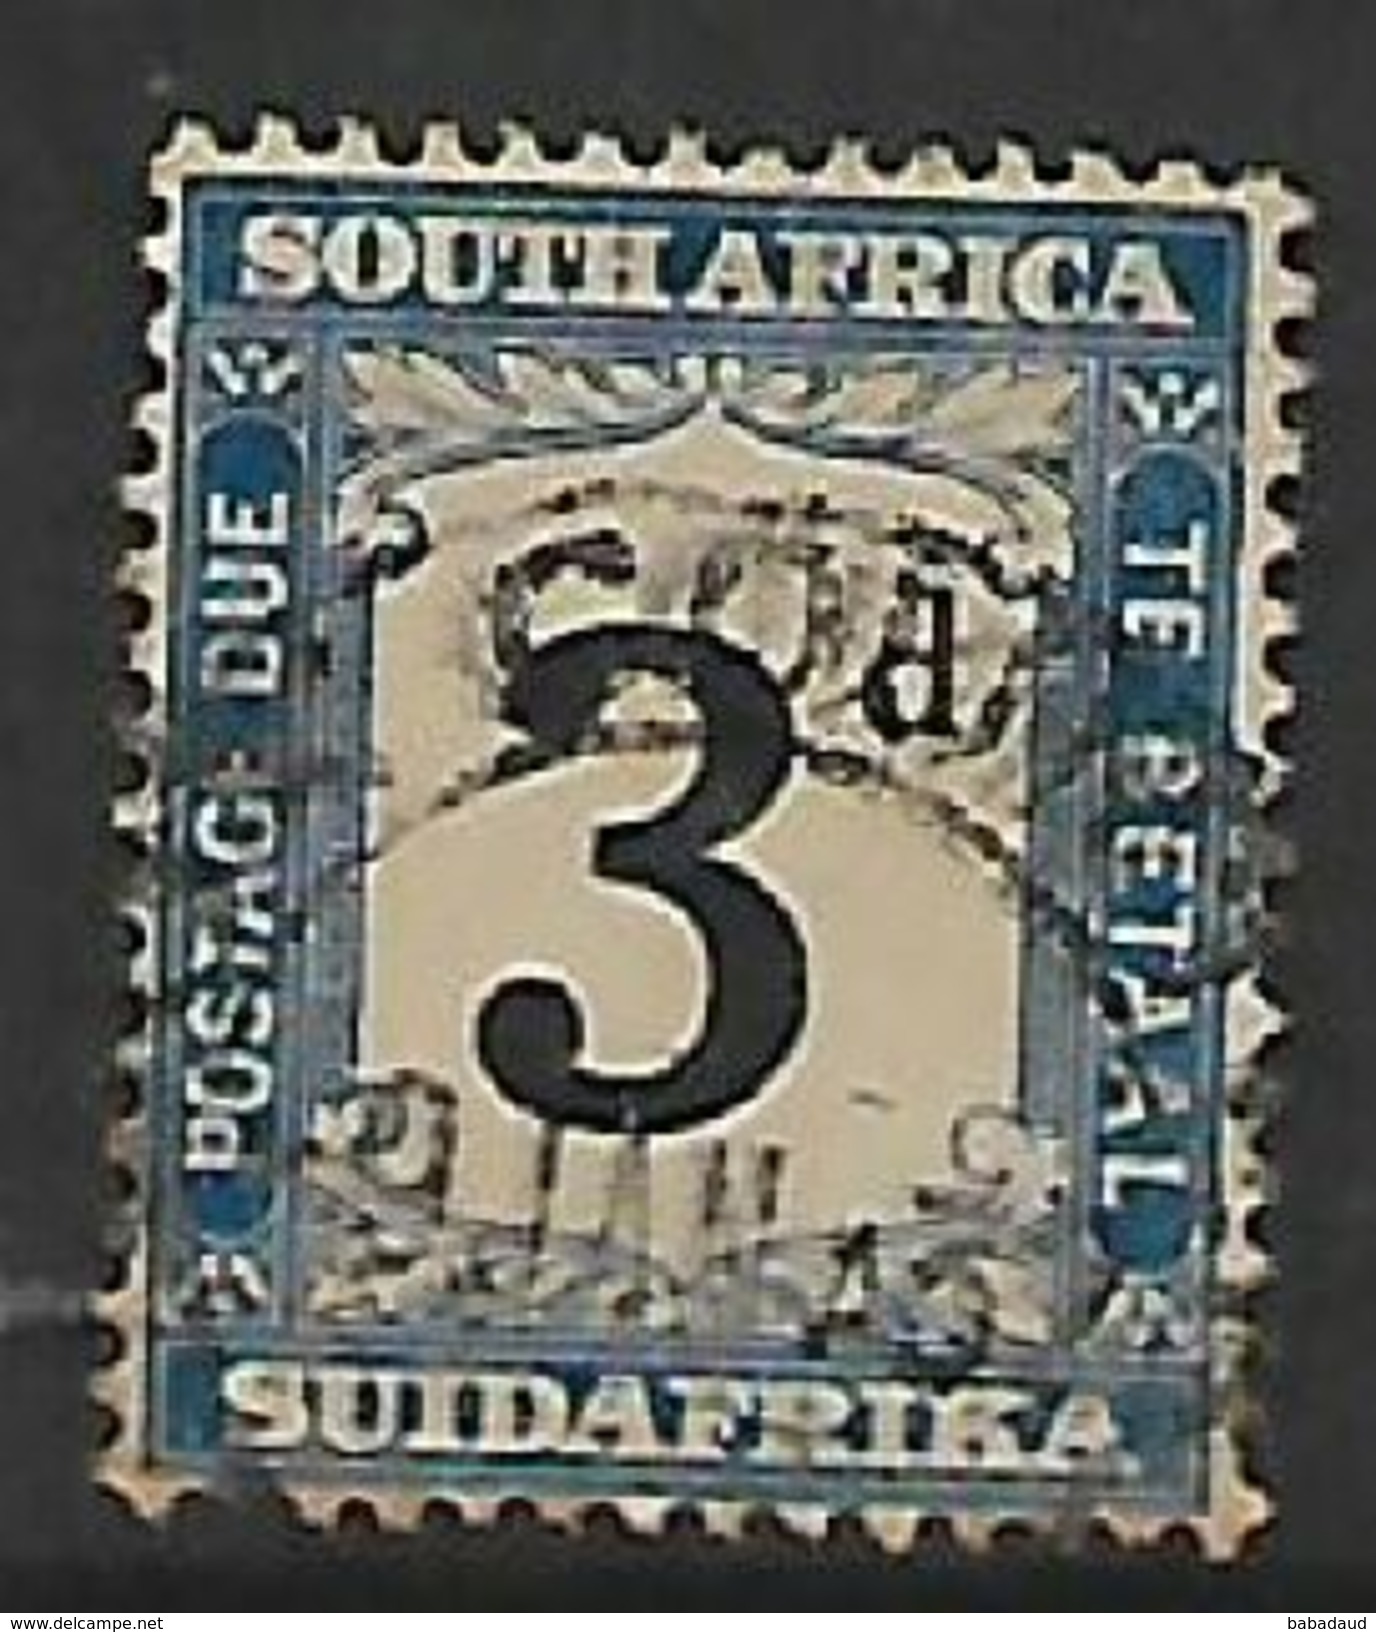 South Africa 1927, 3d Black & Blue,  Postage Due,  C.d.s. Used - Postage Due